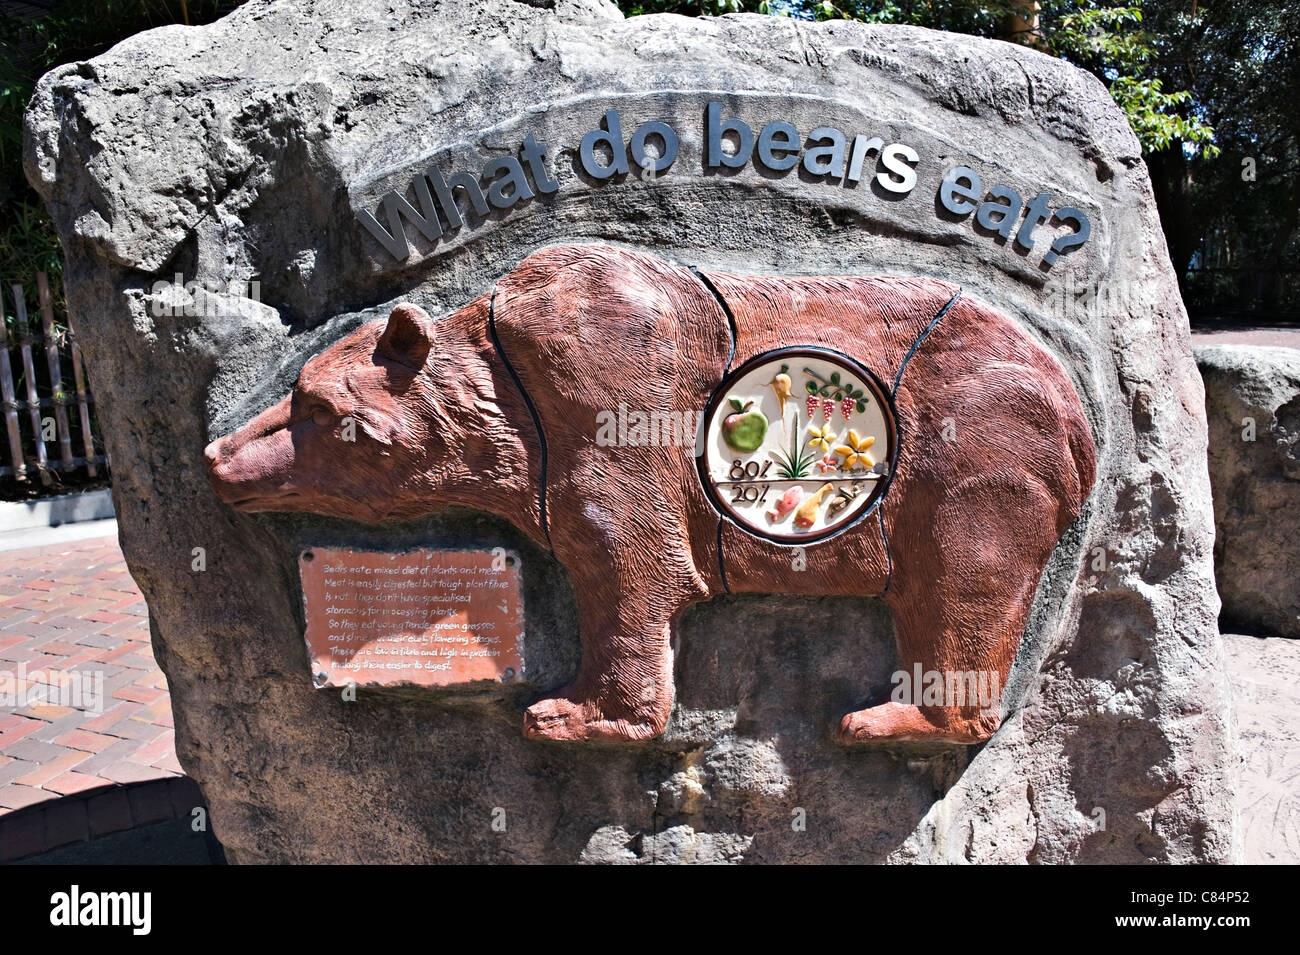 A Stone Sculpture of a Brown Bear Advising Diet 'What do Bears Eat' at Taronga Zoo Sydney New South Wales Australia Stock Photo